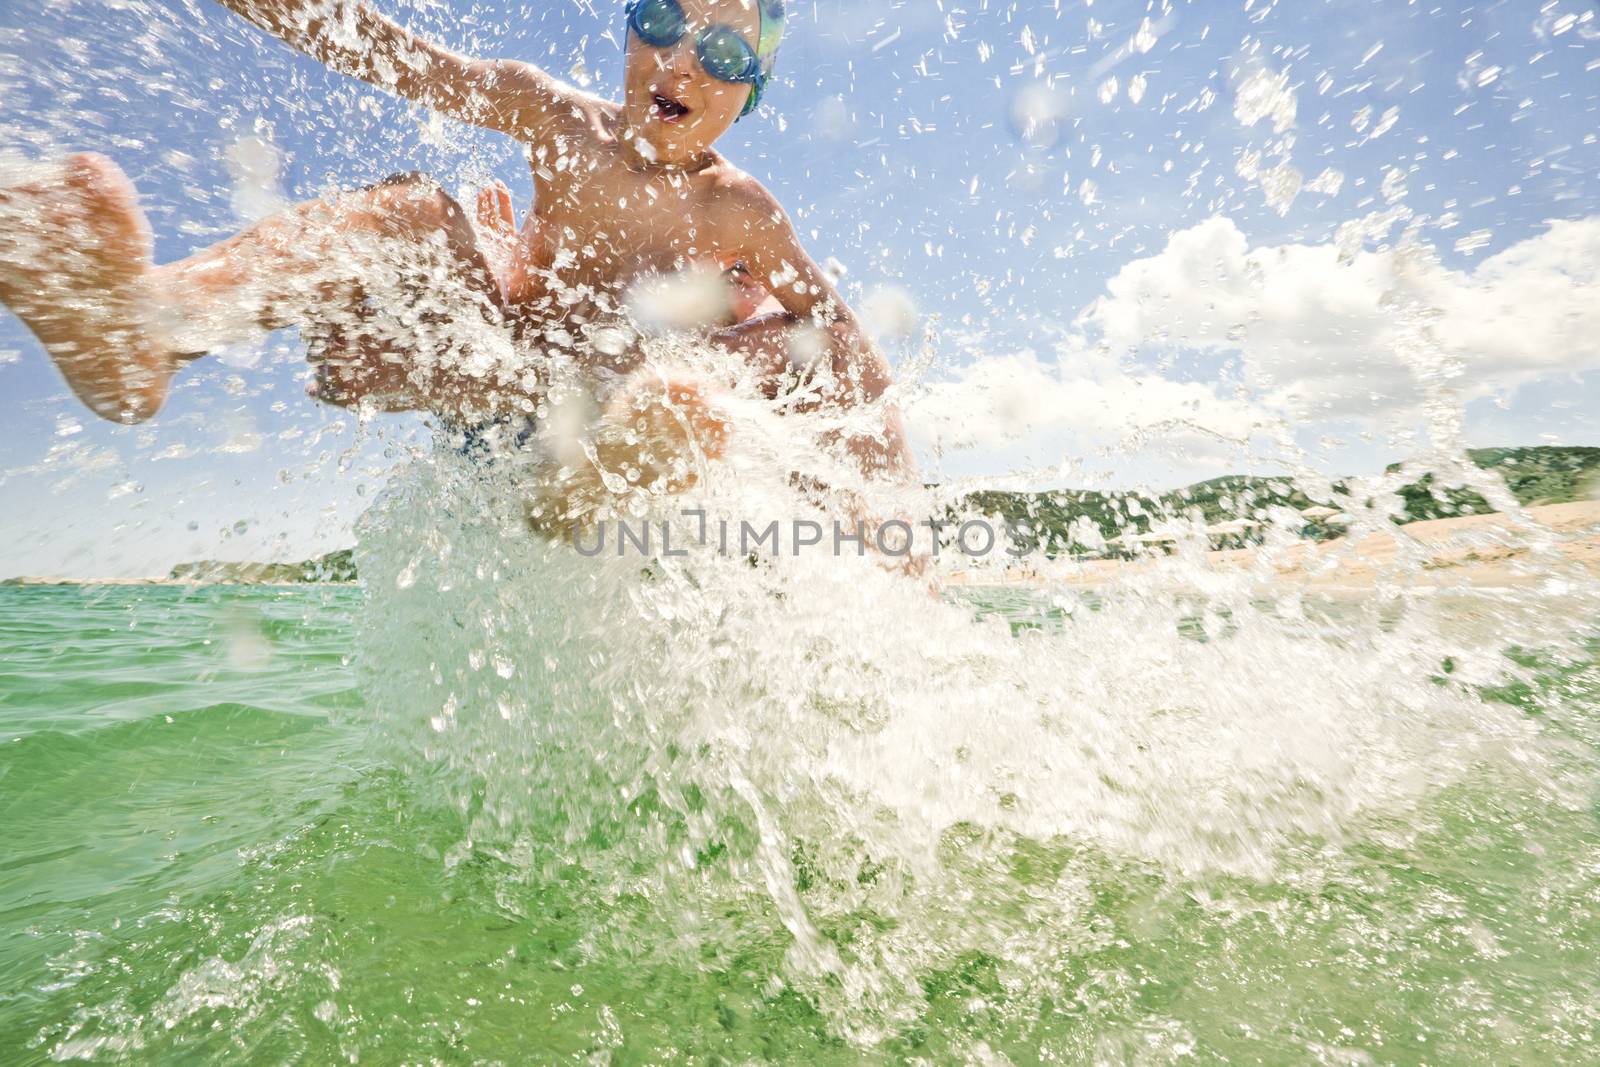 Splashes over an excited kid, thrown in to the see water by his father on a sunny day at the beach.